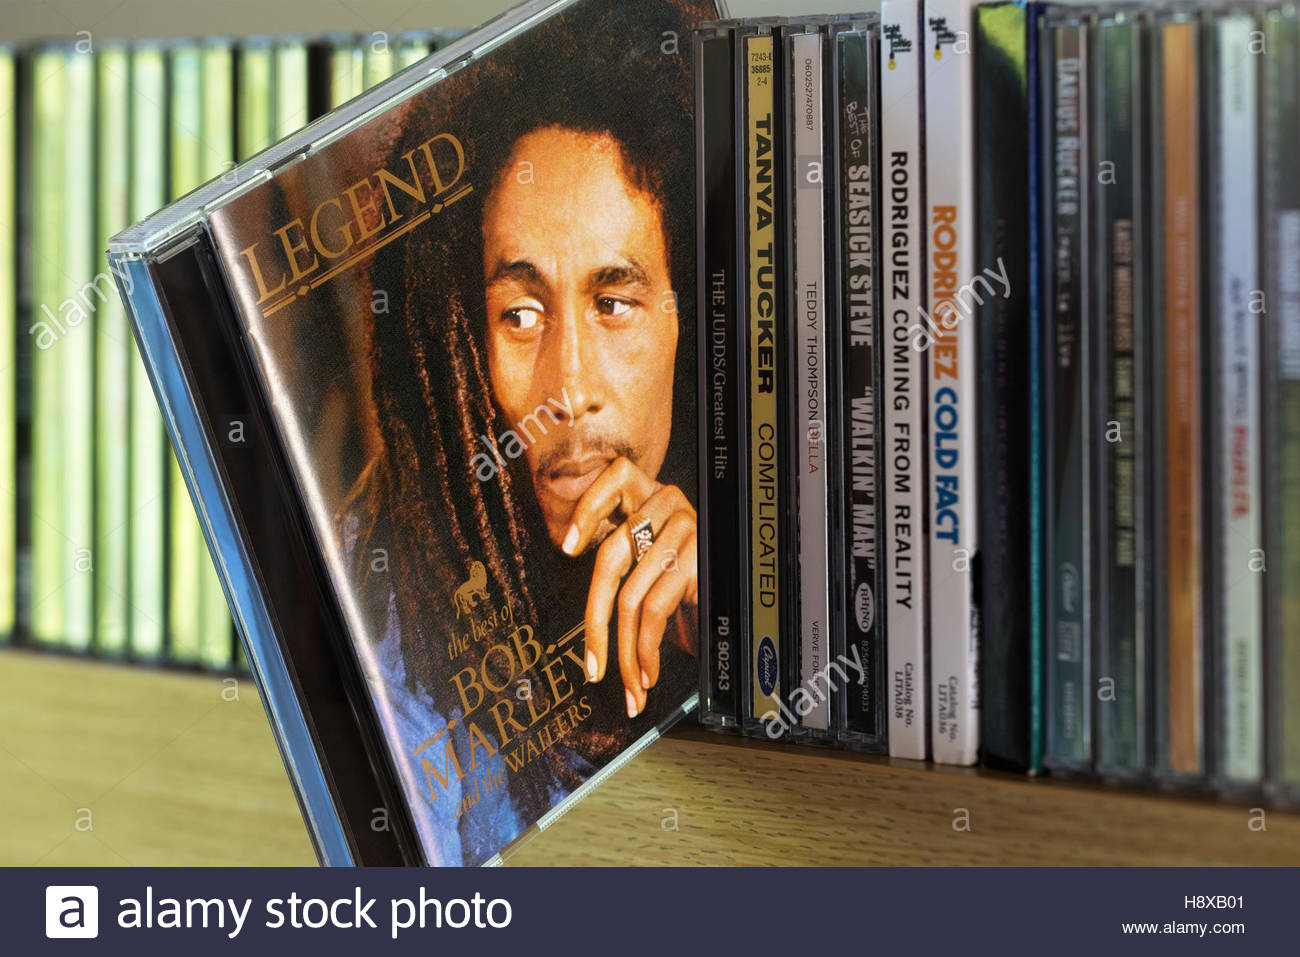 Legend Bob Marley Cd Pulled Out From Among Other Cds On A - 